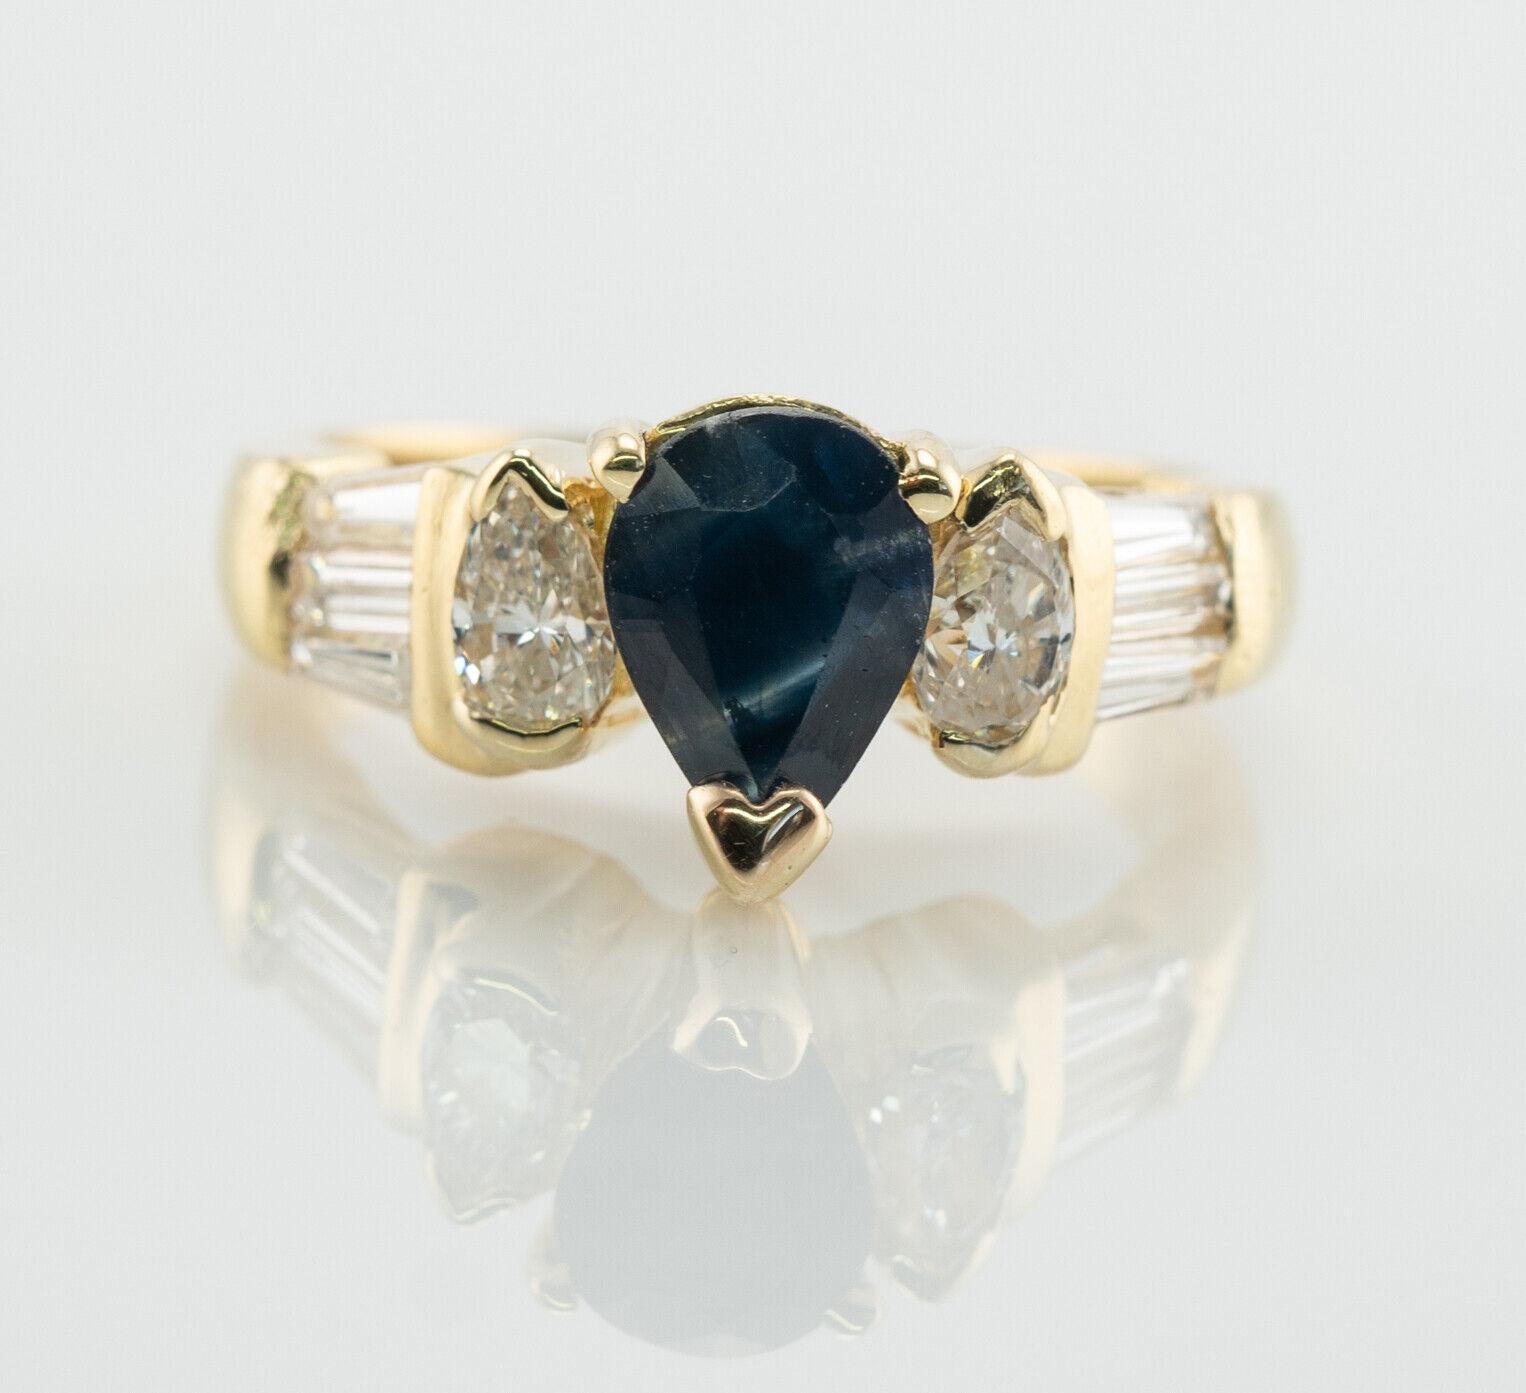 Diamond Sapphire Ring 18K Gold Band Vintage

This lovely estate ring is finely crafted in solid 18K Yellow Gold and set with genuine Earth mined Sapphire and white and fiery diamonds. The center pear cut Sapphire is .75 carat (7mm x 5mm). Two pear